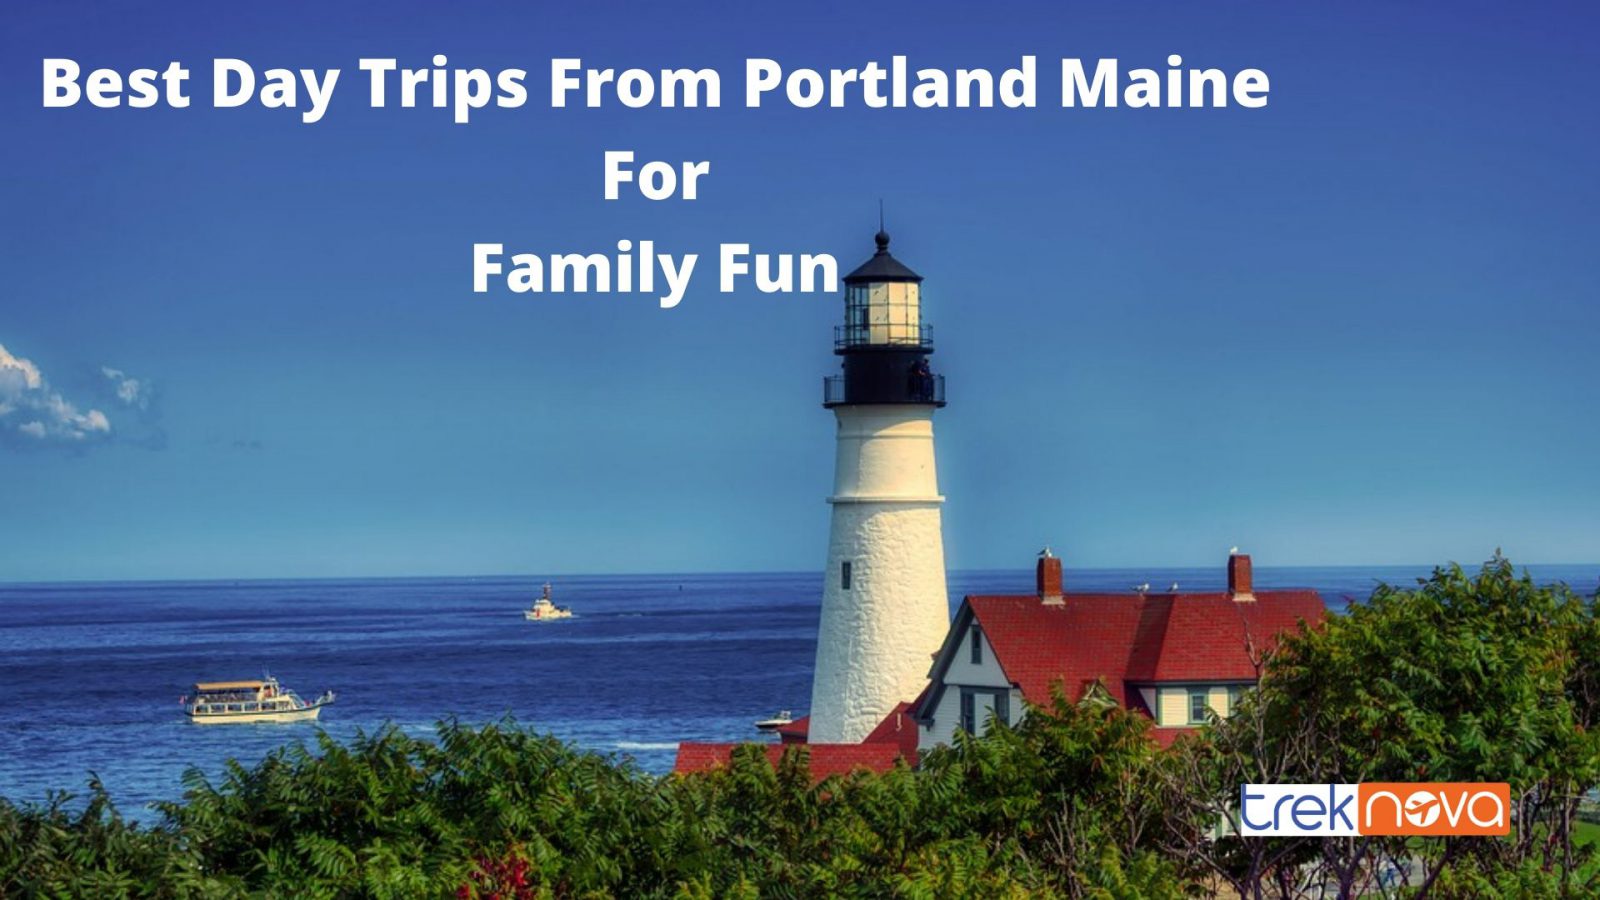 Best Day Trips From Portland Maine For Family Fun